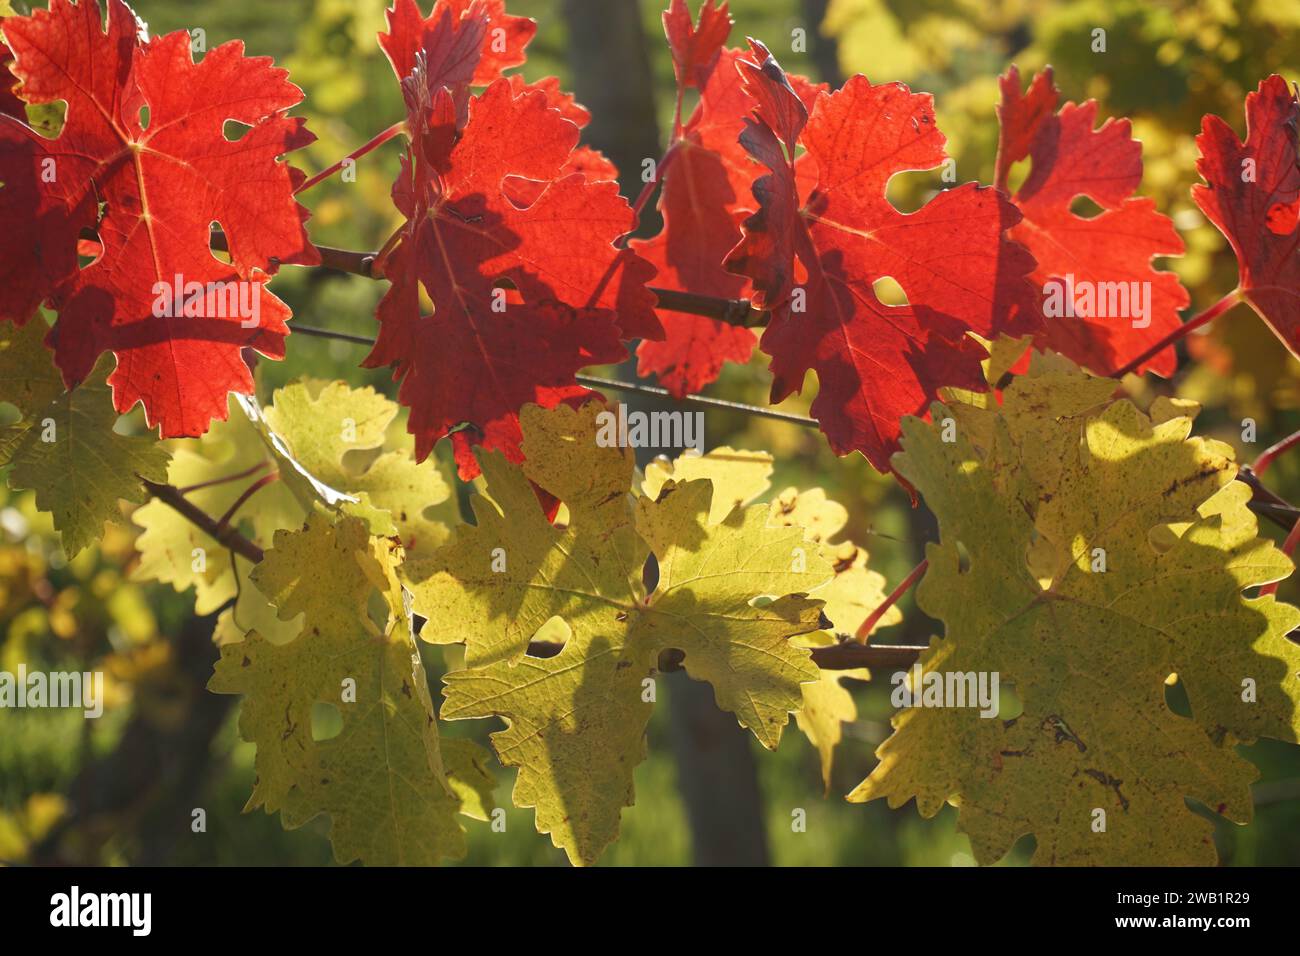 sun shining through leaves in the vineyards in the loire valley, france Stock Photo